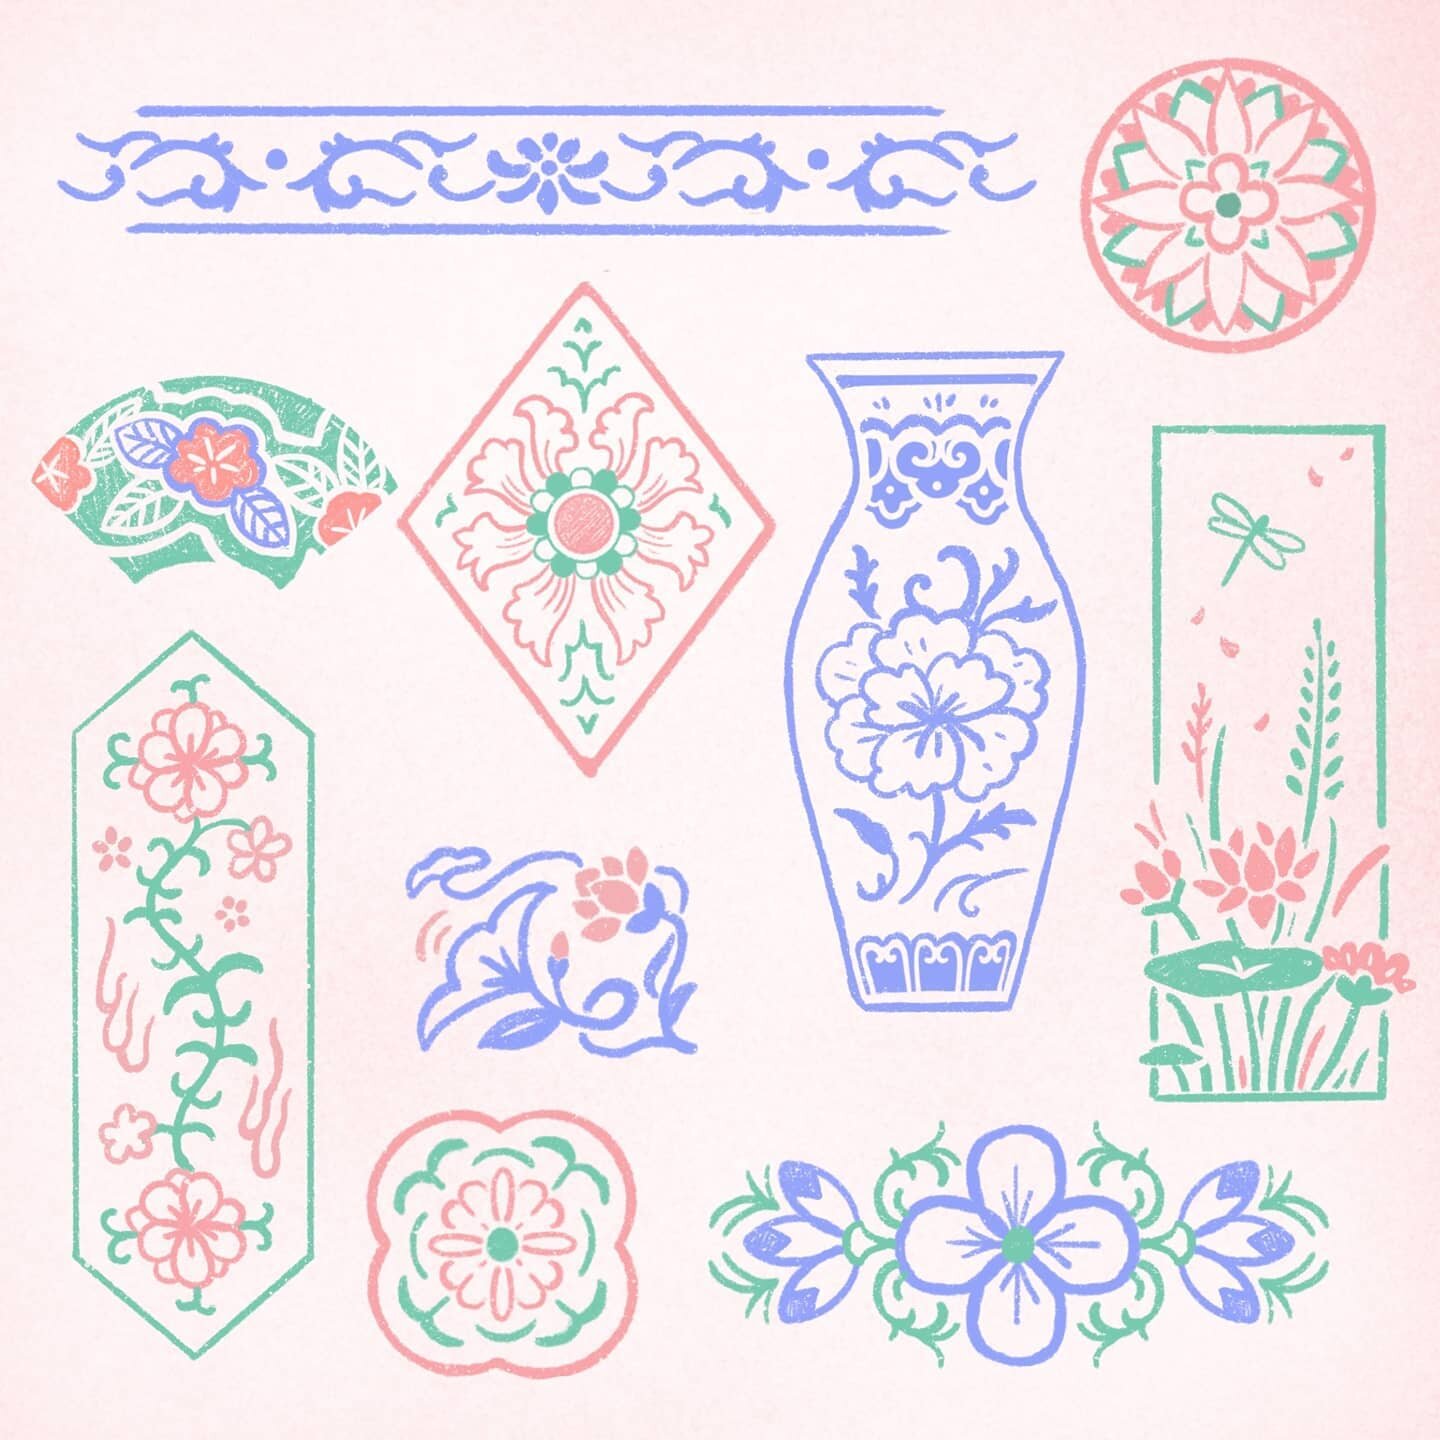 Some famille rose ornamental flash inspired by Qing dynasty vases and Qianlong period ceramics ⚘
I feel these pieces would be best tattooed at a slightly larger scale than my usual. I'm loving the idea of wraps, sternums, neck/back... 
Also a shoutou